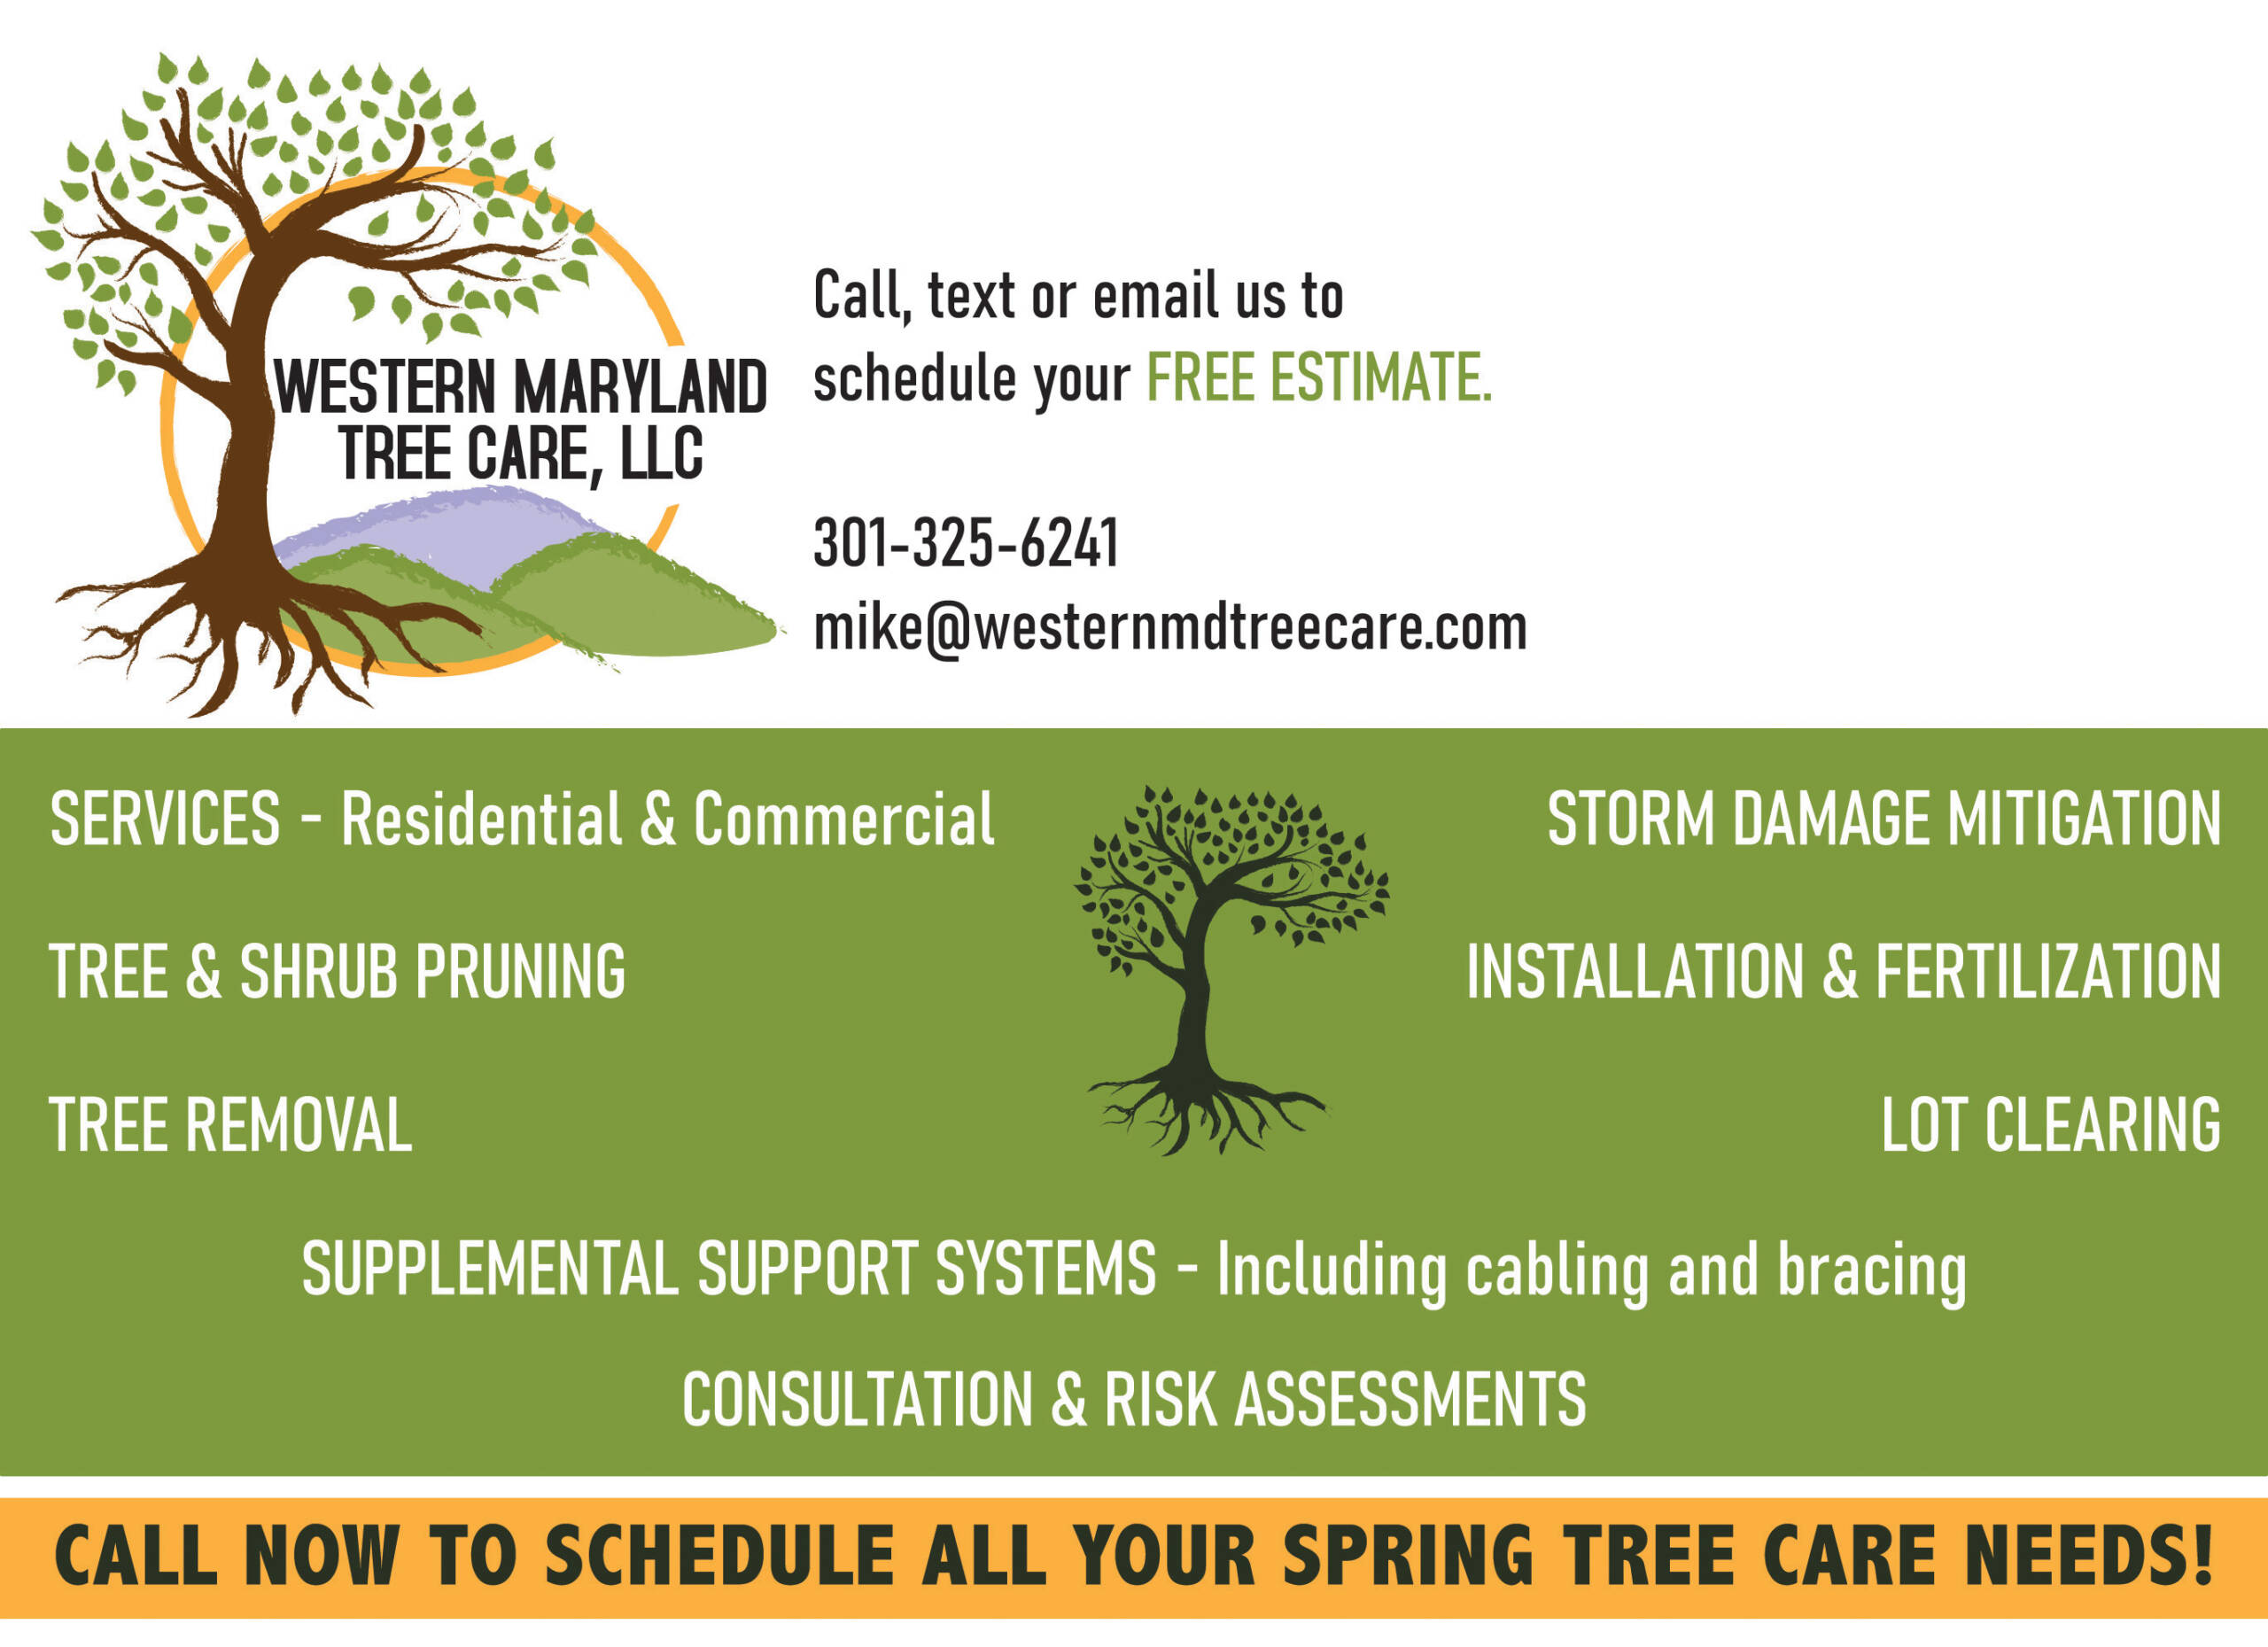 Western Maryland Tree Care, LLC - Call, text or email us to schedule your FREE ESTIMATE! - 301-325-6241 - mike@westernmdtreecare.com - SERVICES: Residential and Commercial, tree and shrub pruning, tree removal, storm damage mitigation, installation and fertilization, lot clearing, supplemental support systems, including cabling and bracing, consultation and risk assessments - CALL NOW TO SCHEDULE ALL YOUR SPRING TREE CARE NEEDS!